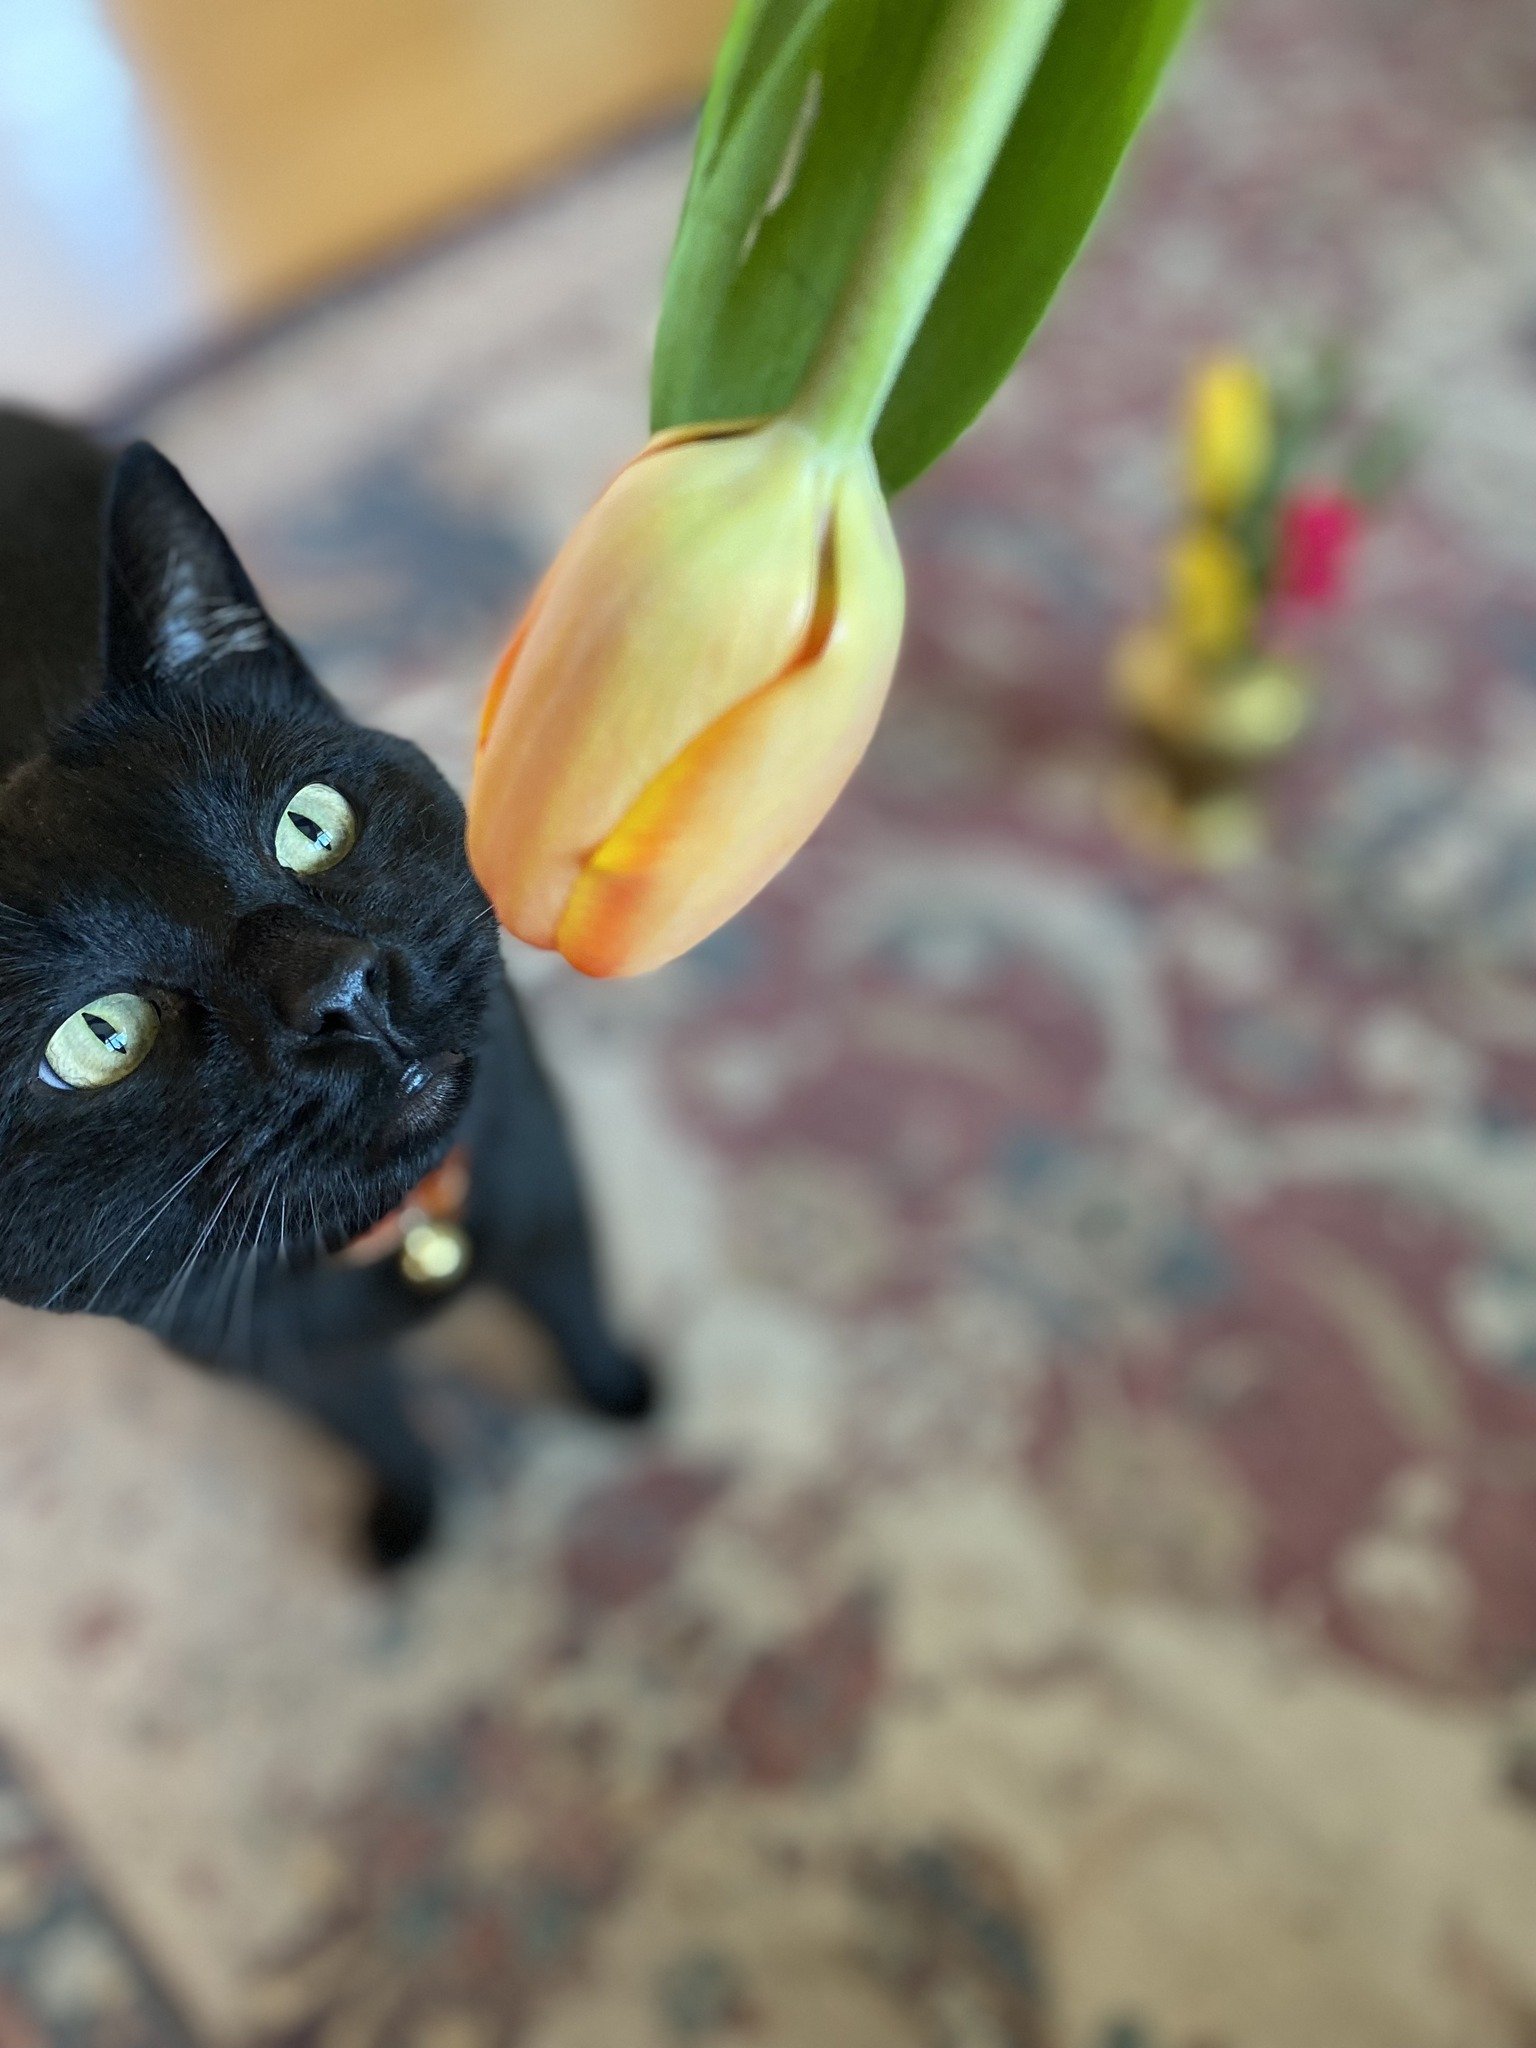 Happy Friday, everyone! Meet my adventurous feline ✈️ Jet

Other aliases: 🐾 Jet Pet 🐾 Jet Boil 🐾 Jetty Betty 🐾 Kitty Witty.

Do your pets have fun nicknames too? Drop them in the comments below&mdash;I'd love to hear what creative names you've co